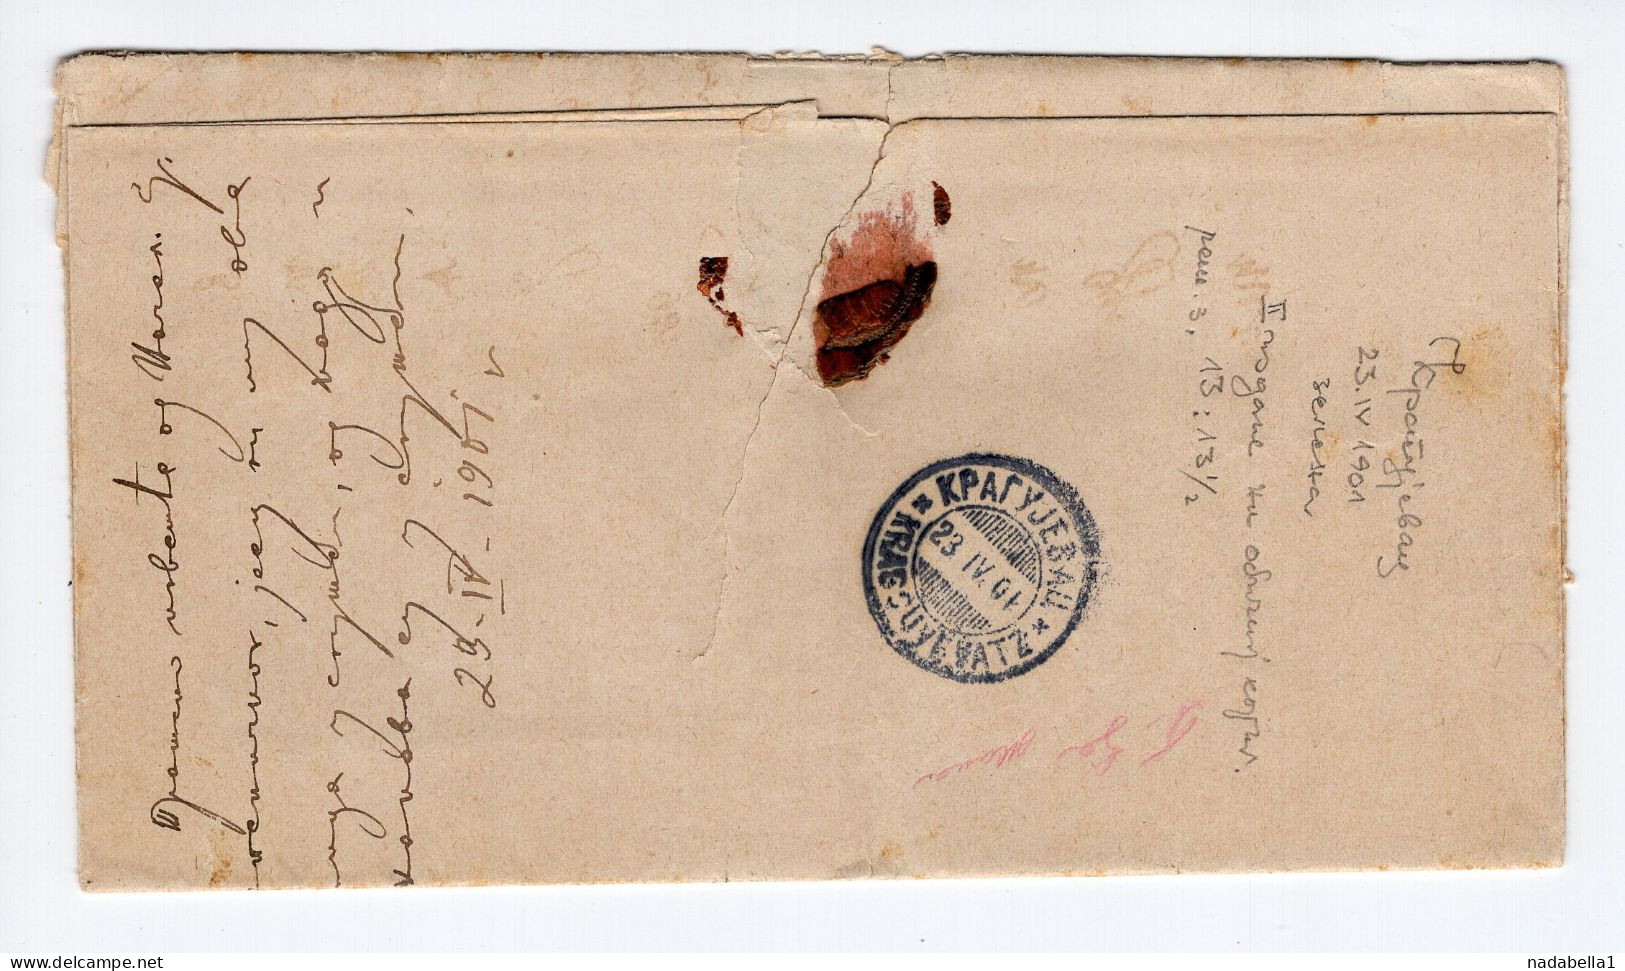 1901. SERBIA,KRAGUJEVAC,LOCAL RATE 2 X 5 PARA FOR DOUBLE WEIGHT,LETTER COVER 21.04.1901 TRNAVA - Serbien